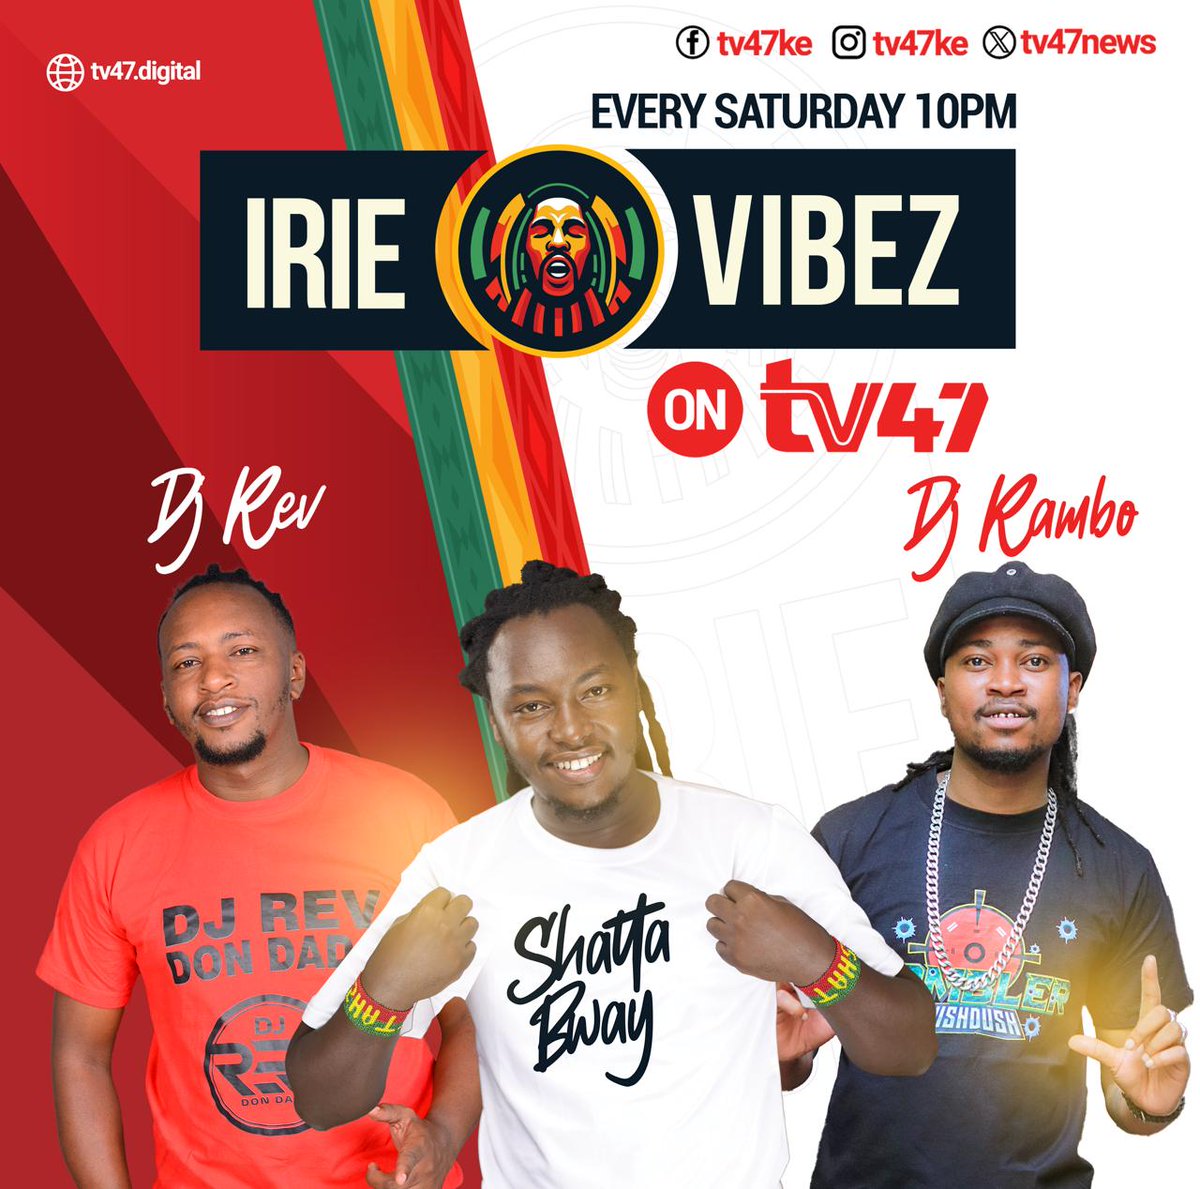 Get ready to feel the positive vibes with 'TV47 Irie Vibes'! Join us tonight at 10pm for a celebration of reggae music, hosted by the incomparable Shatta Buay. From classic hits to hidden gems, we've got something for everyone. #IrieVibezTV47